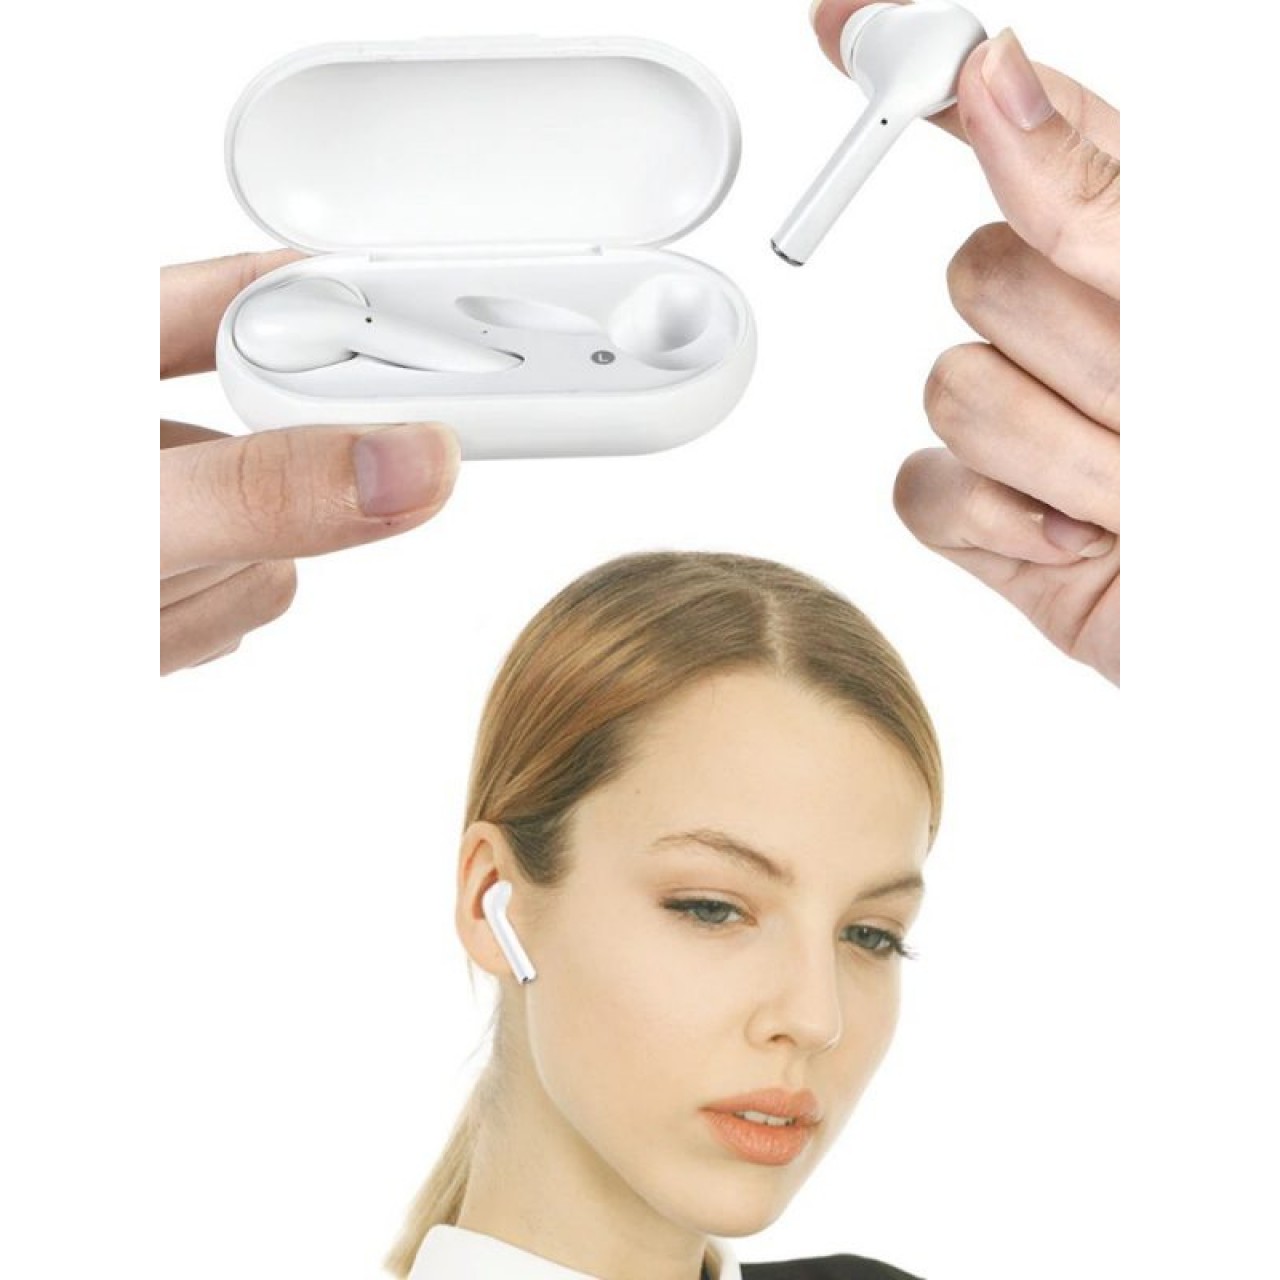 QCY T5 TWS WHITE TRUE WIRELESS GAMING EARBUDS 5.1 BLUETOOTH HEADPHONES ENC IPX5 SPEAKER 6MM 5HRS - 5866